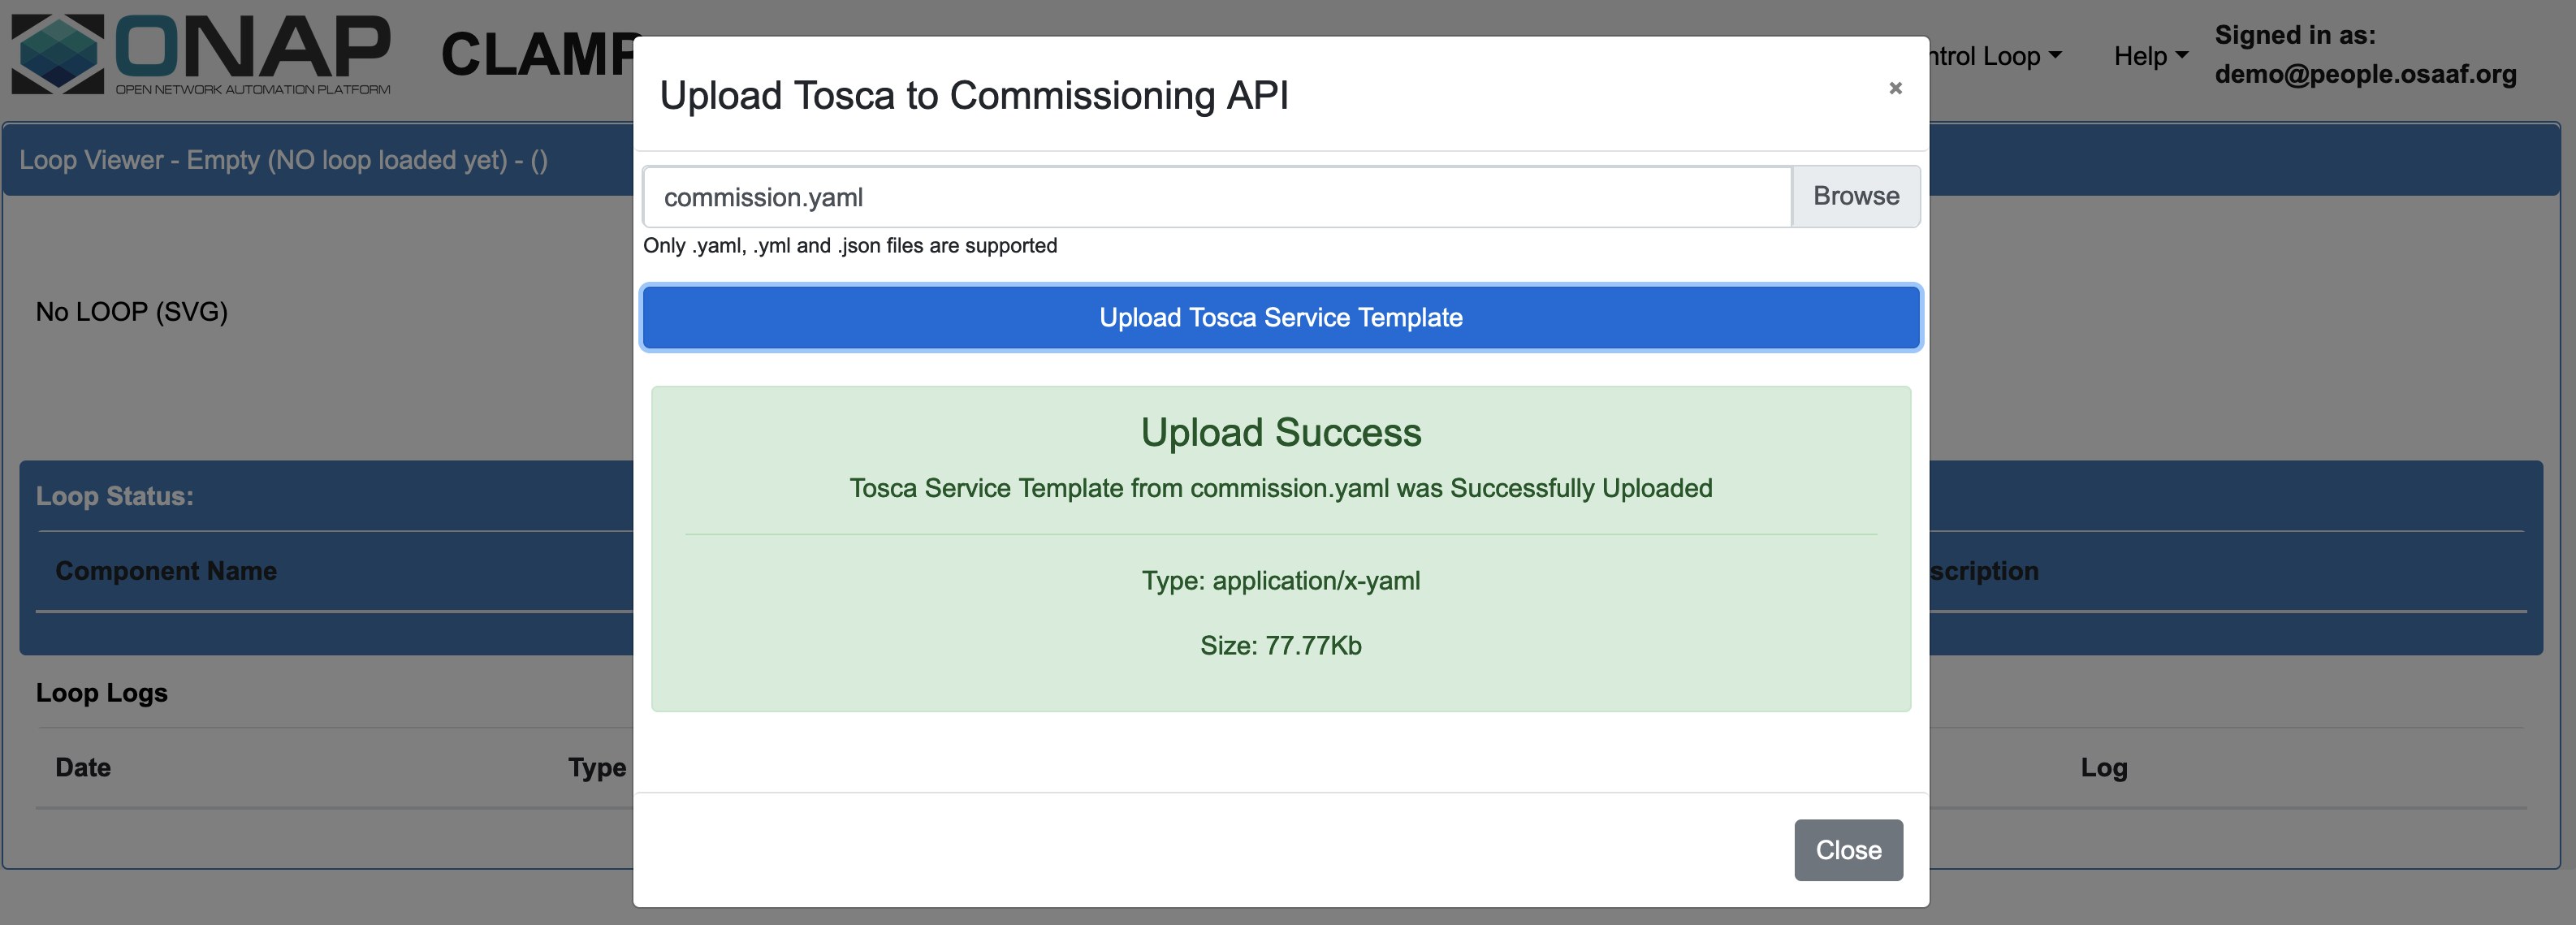 Tosca template uploaded successfully